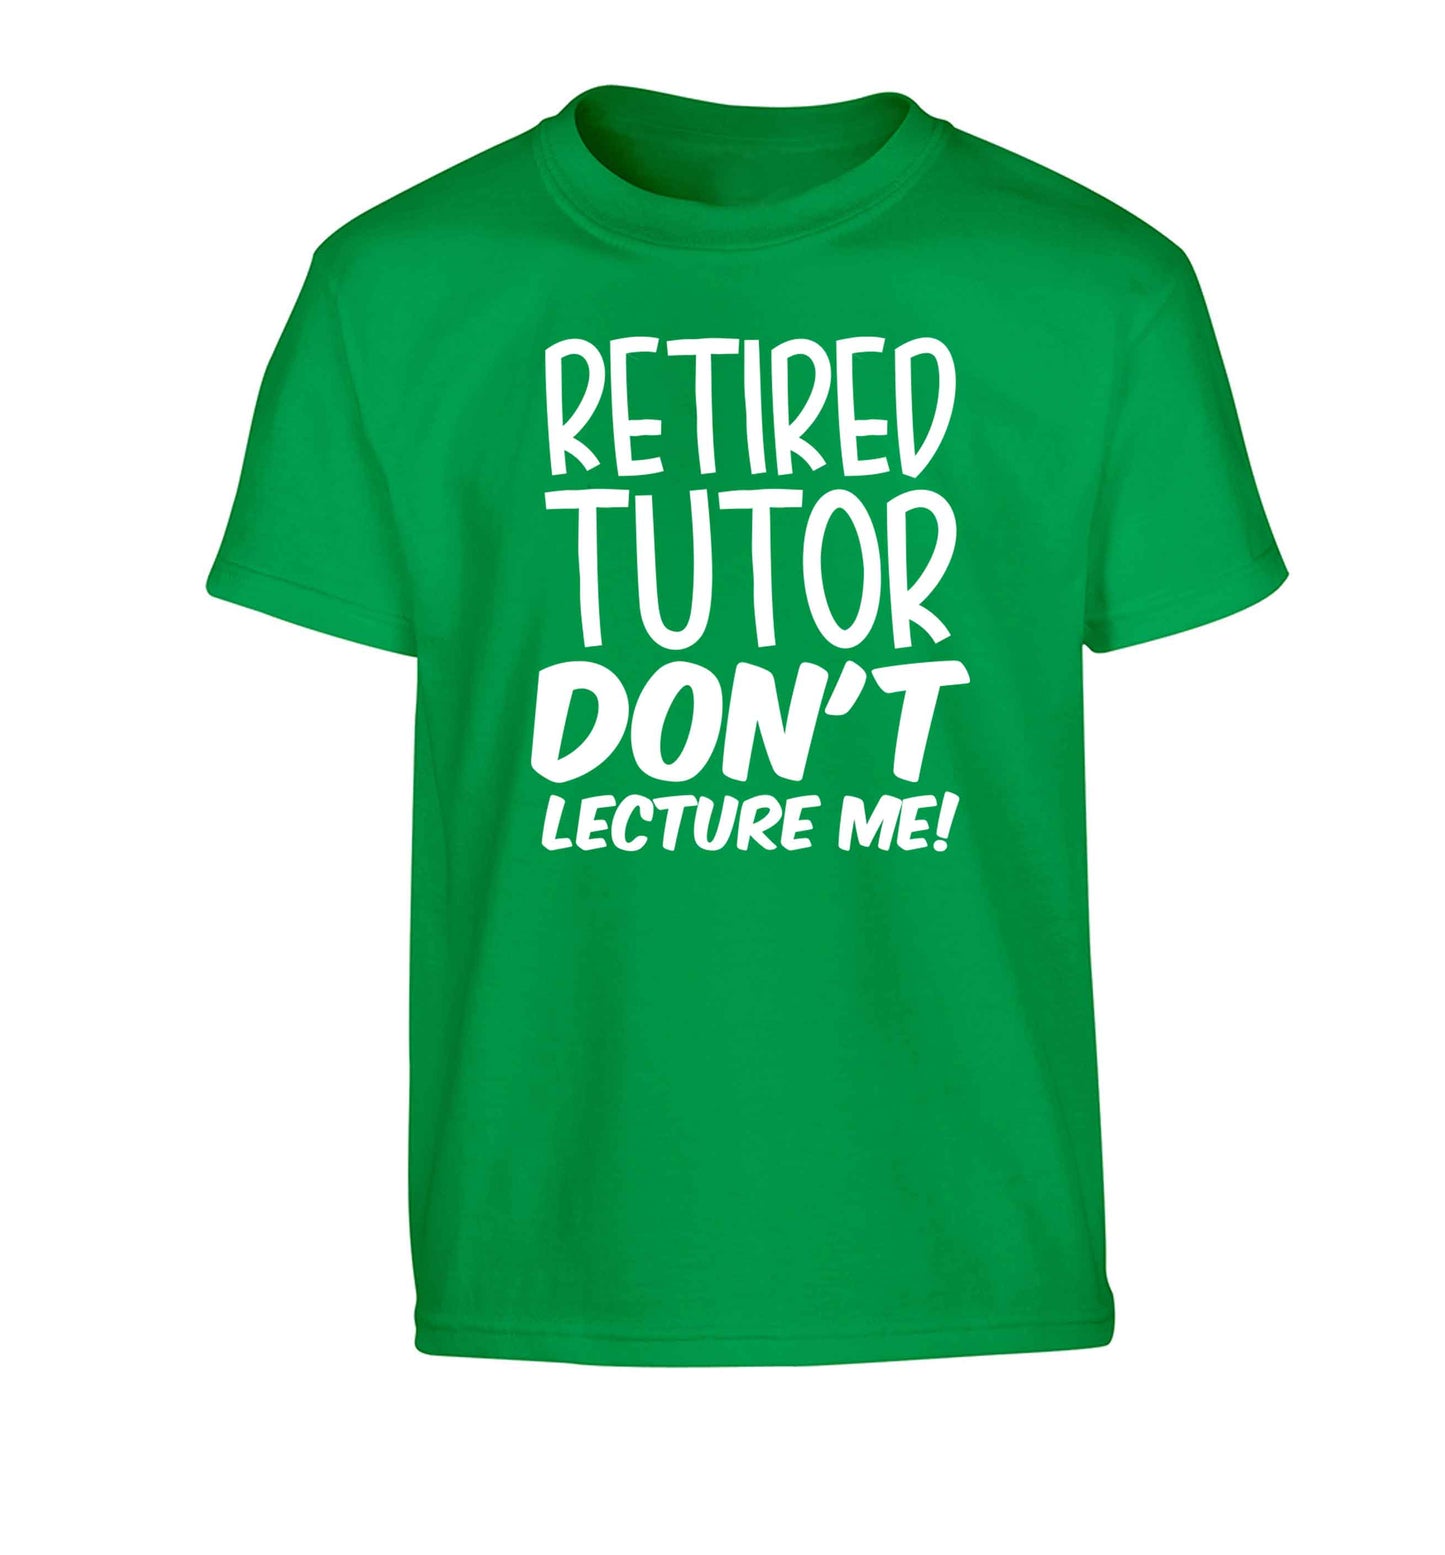 Retired tutor don't lecture me! Children's green Tshirt 12-13 Years